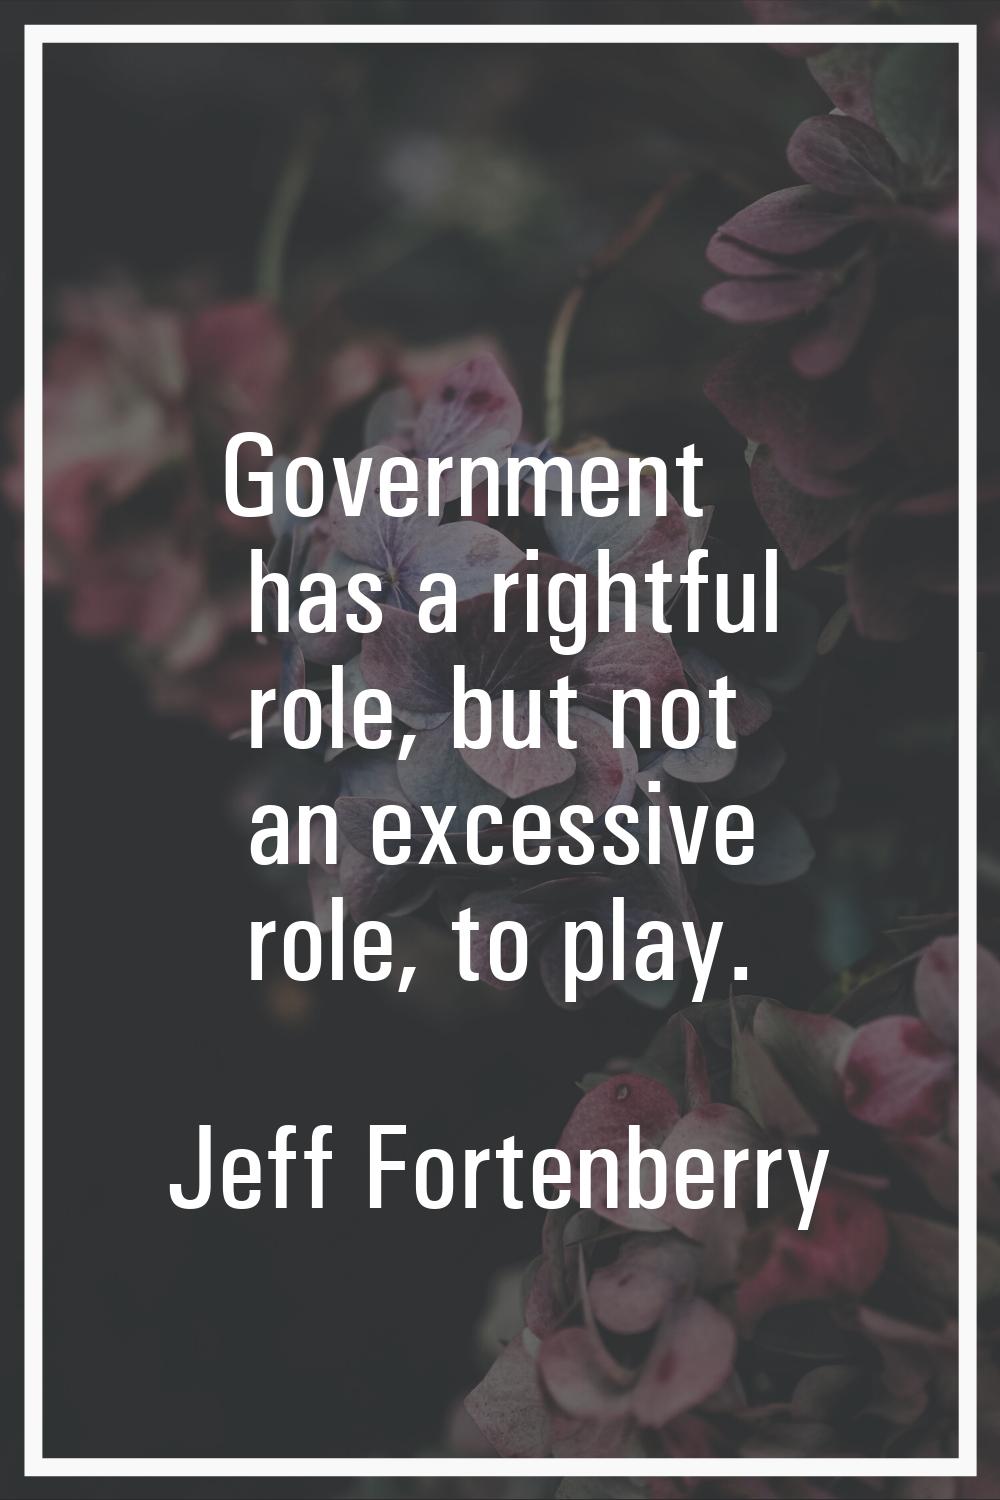 Government has a rightful role, but not an excessive role, to play.